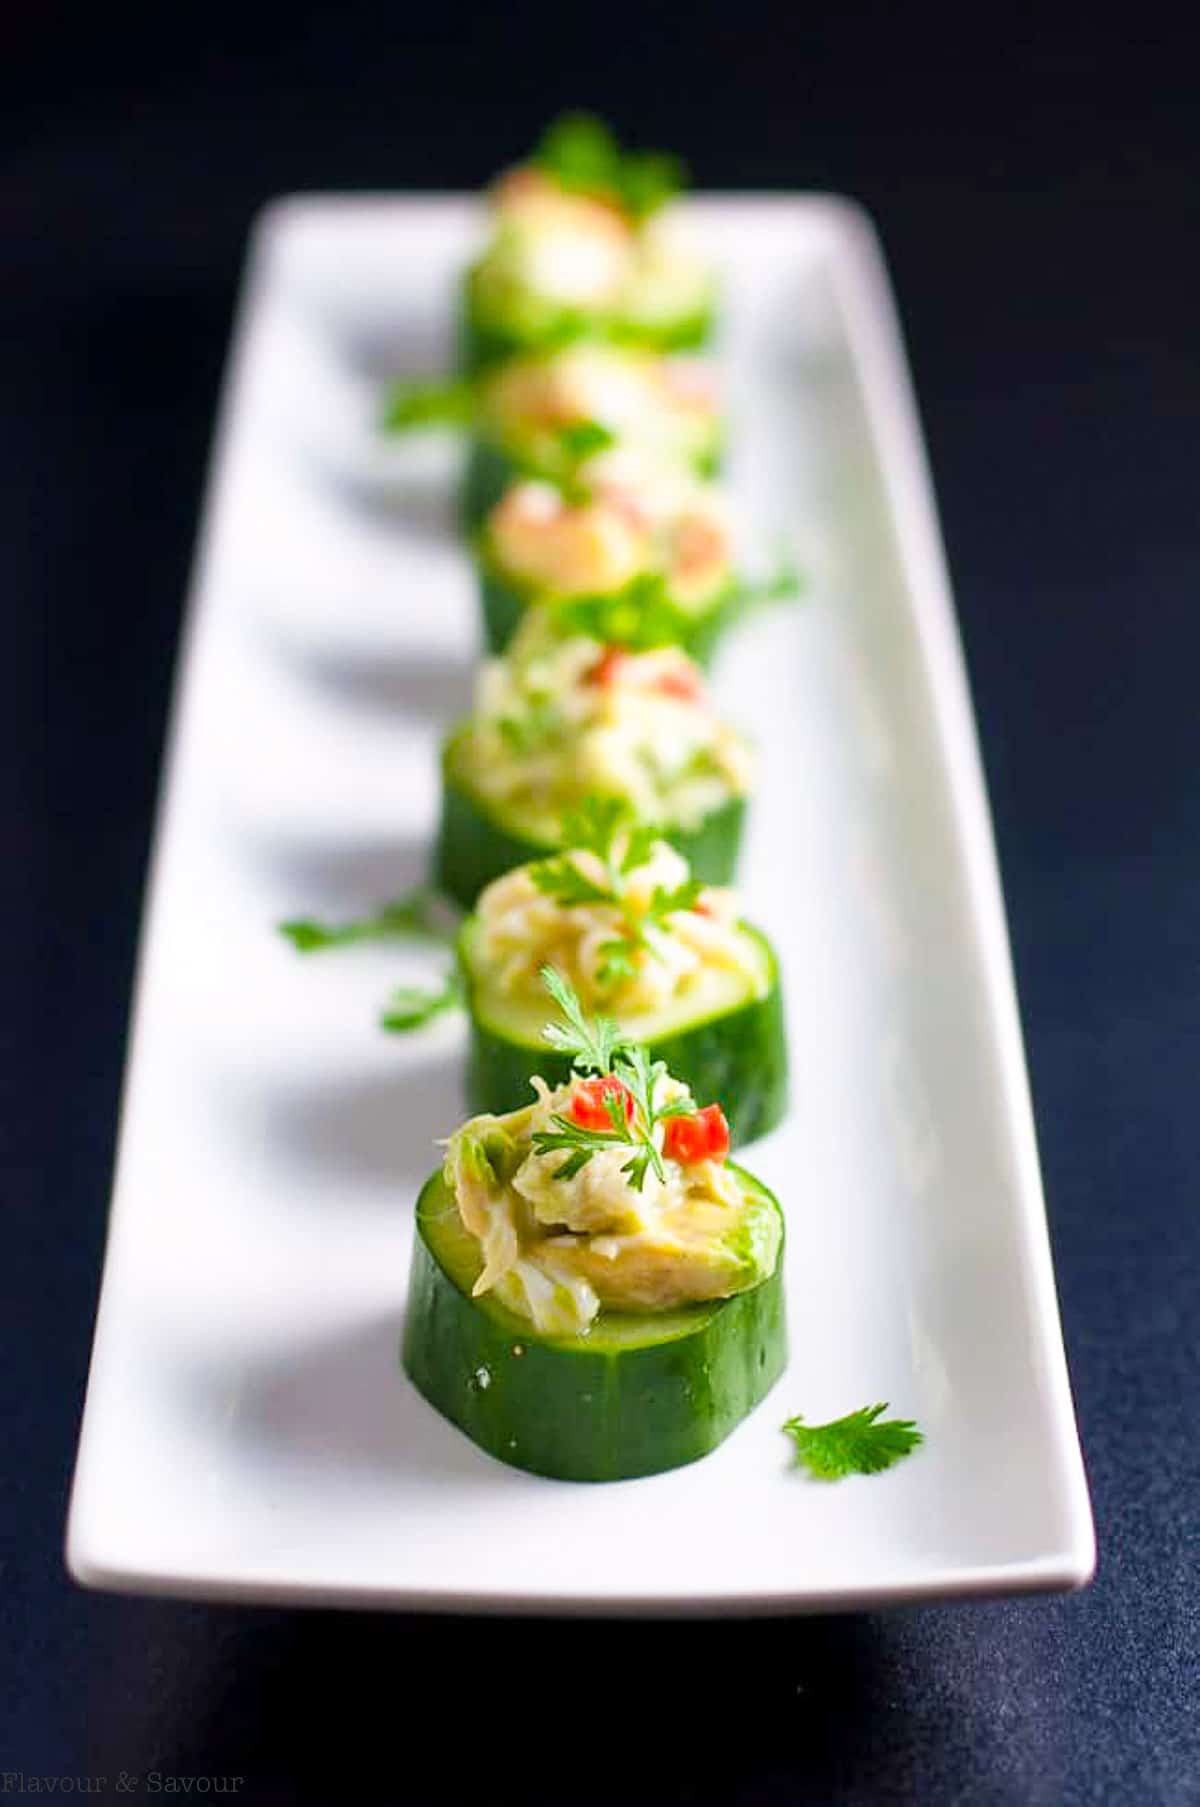 Crab stuffed cucumber bites in a single row on a narrow white platter.